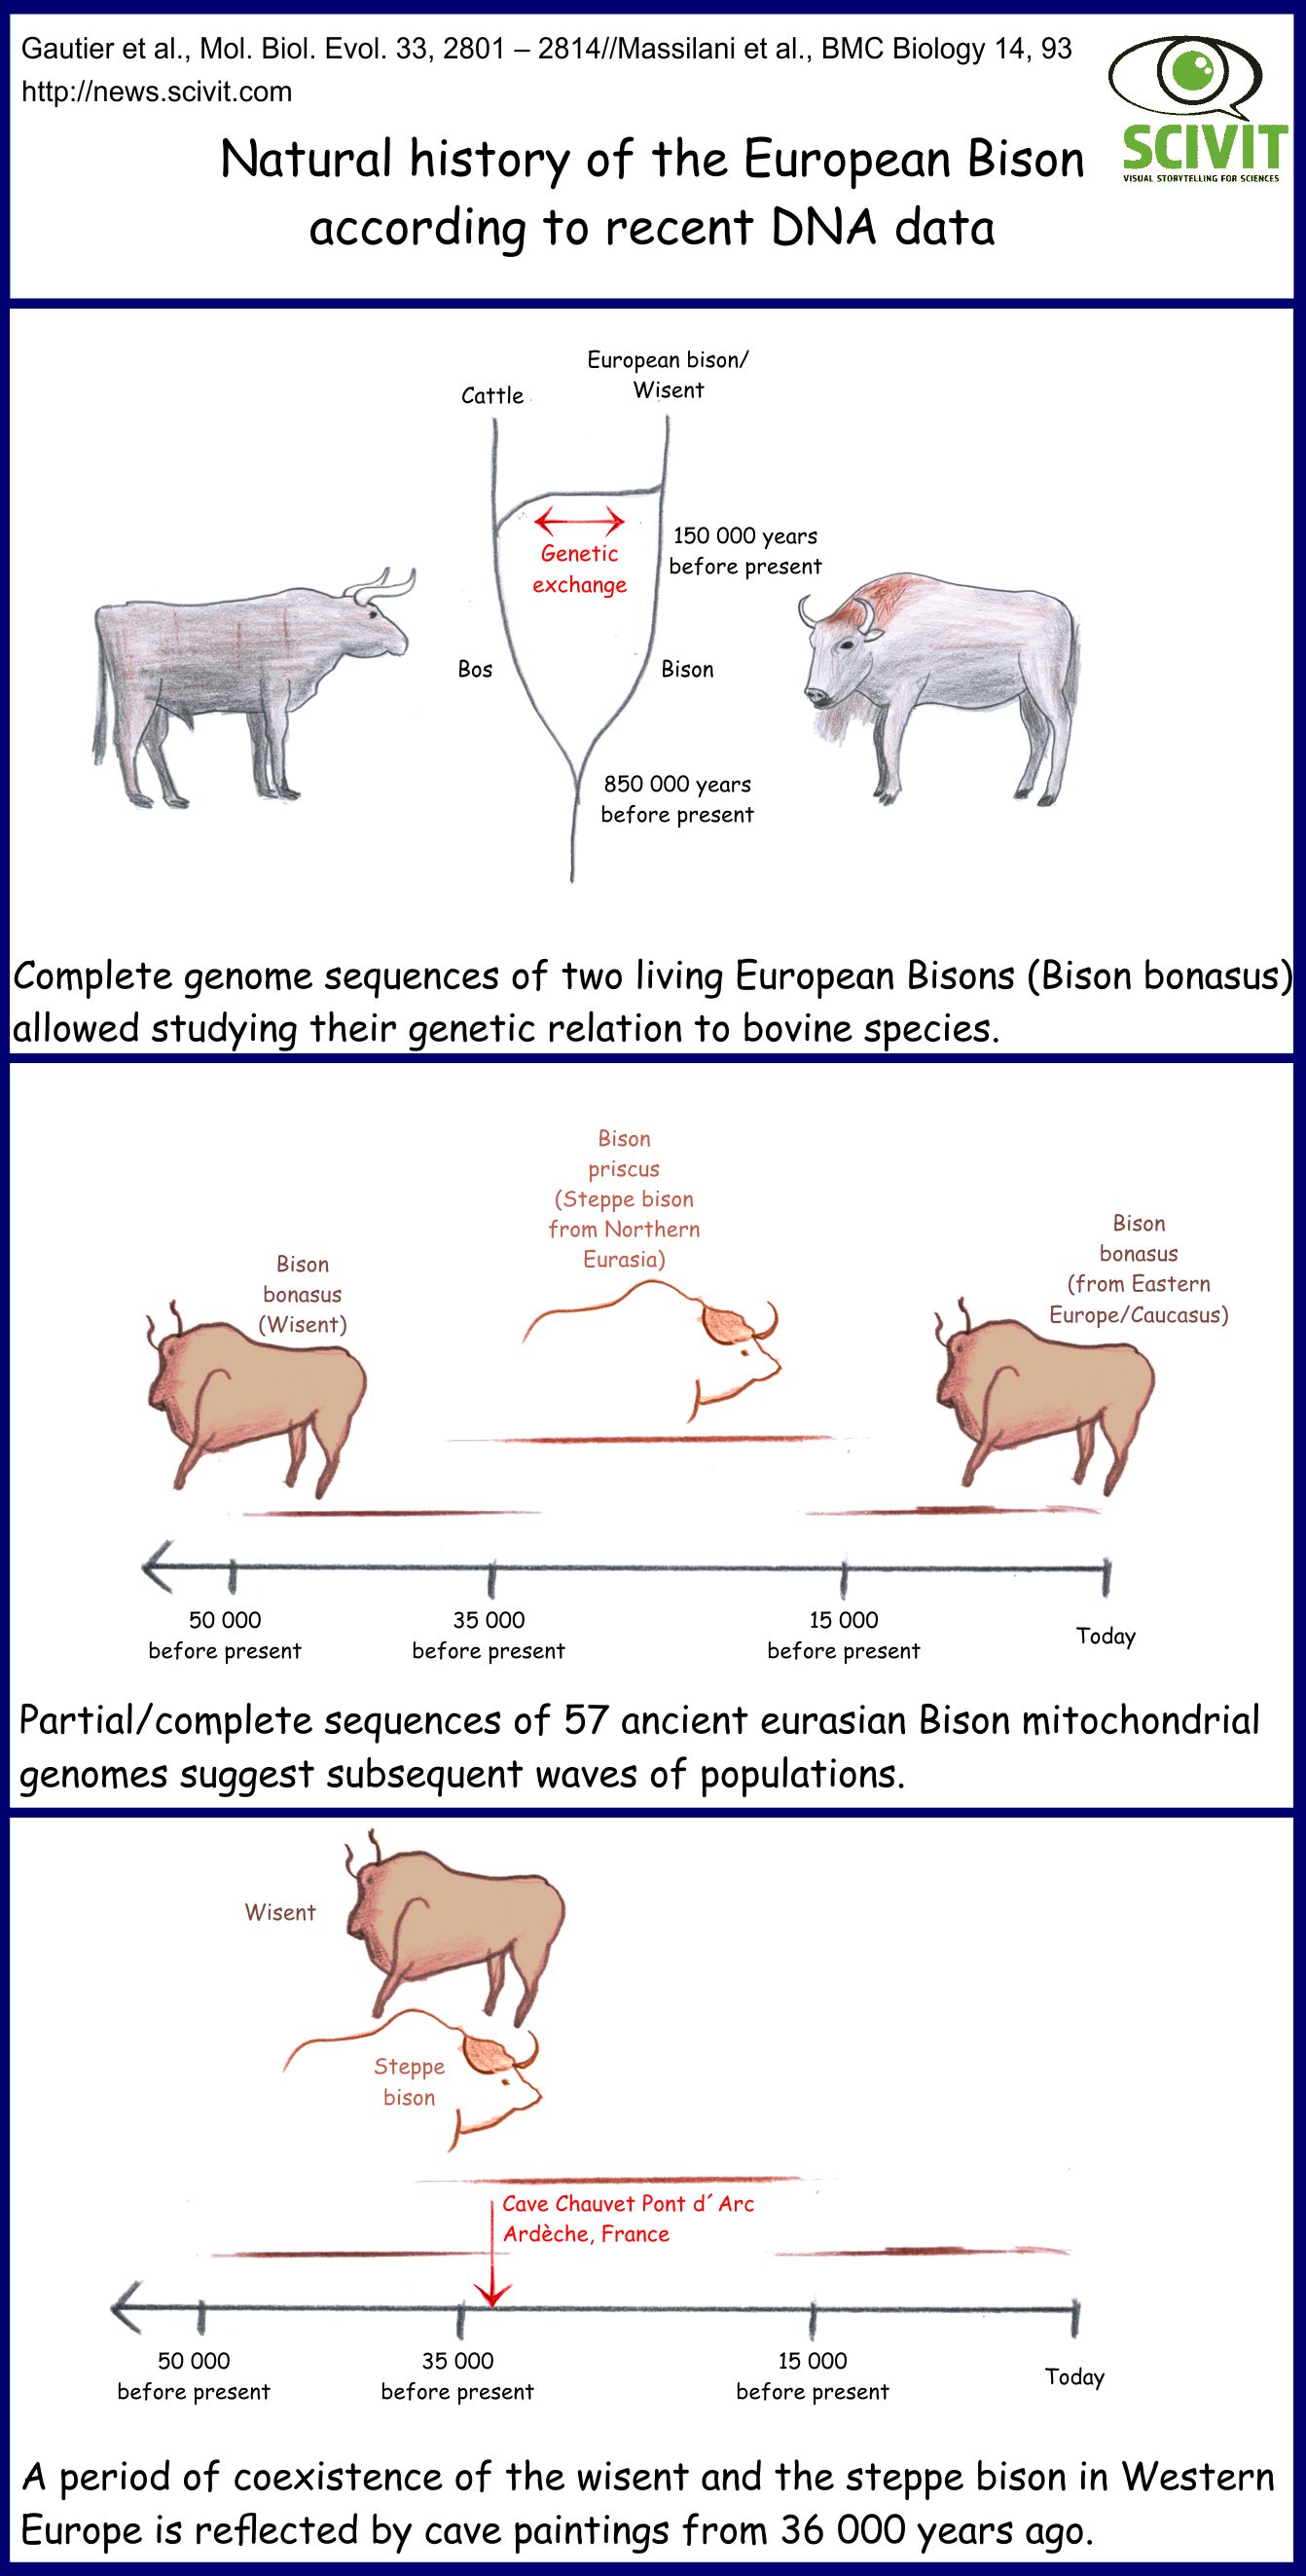 Natural history of the European Bison according to recent DNA data